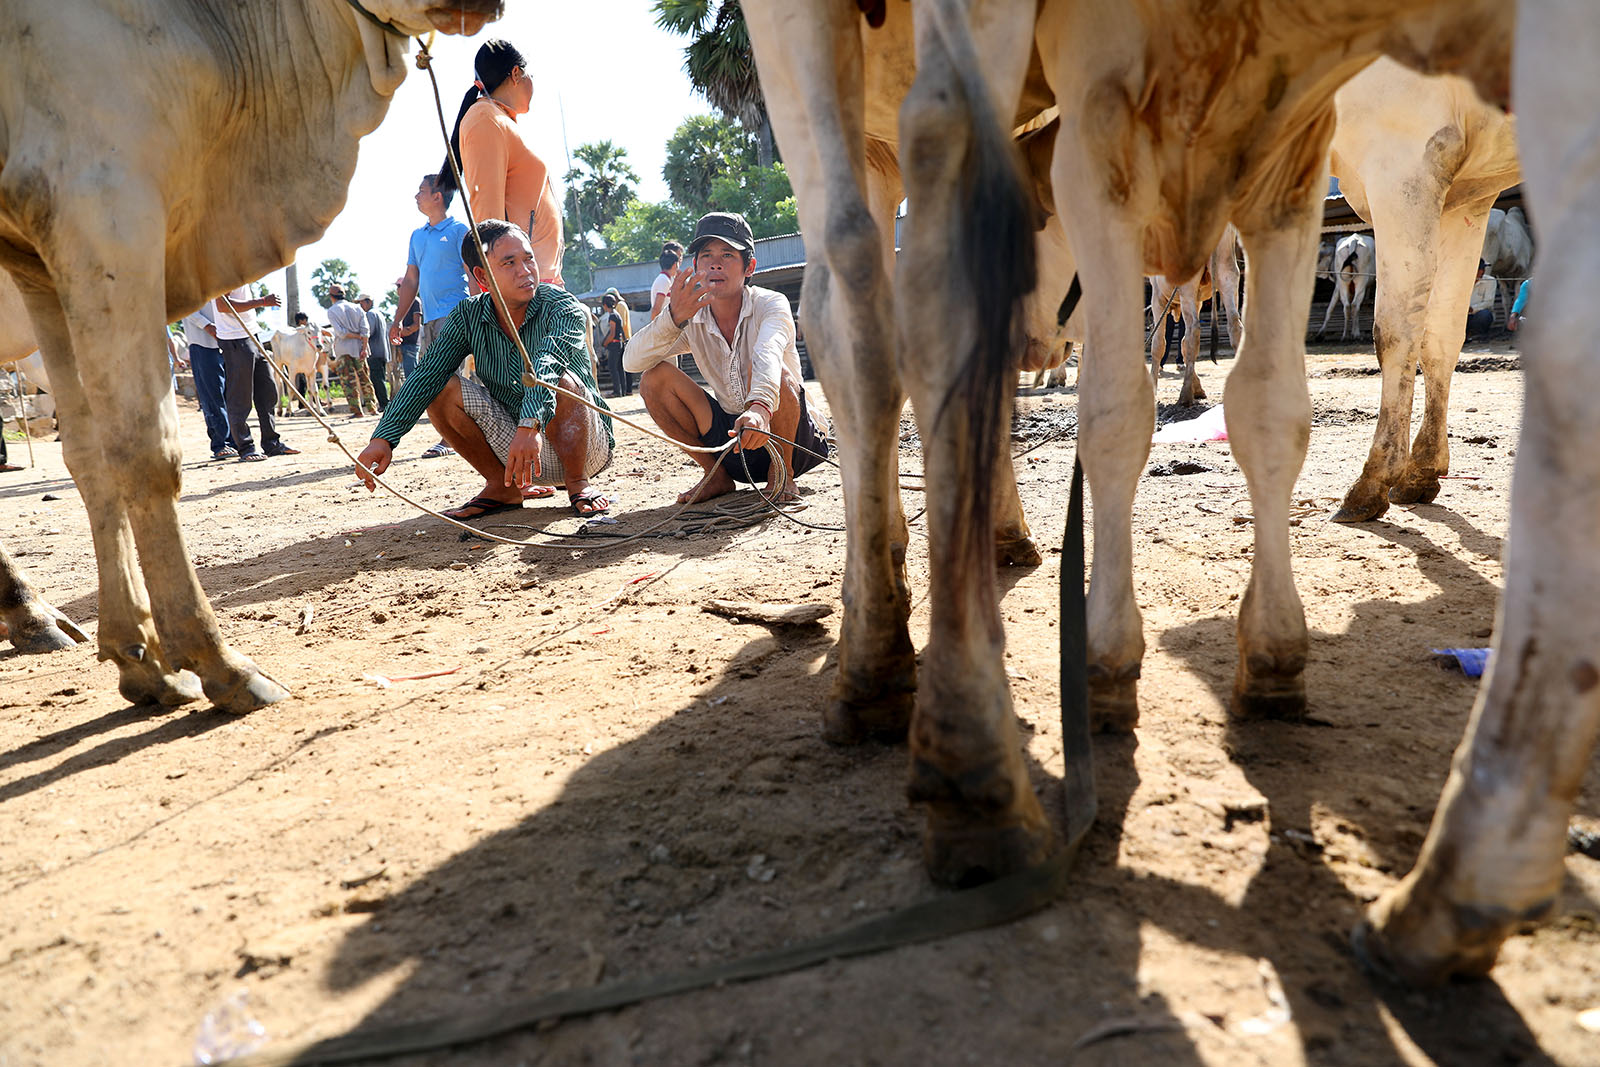 Some local residents of Tinh Bien District, An Giang, also sell their cows at the market